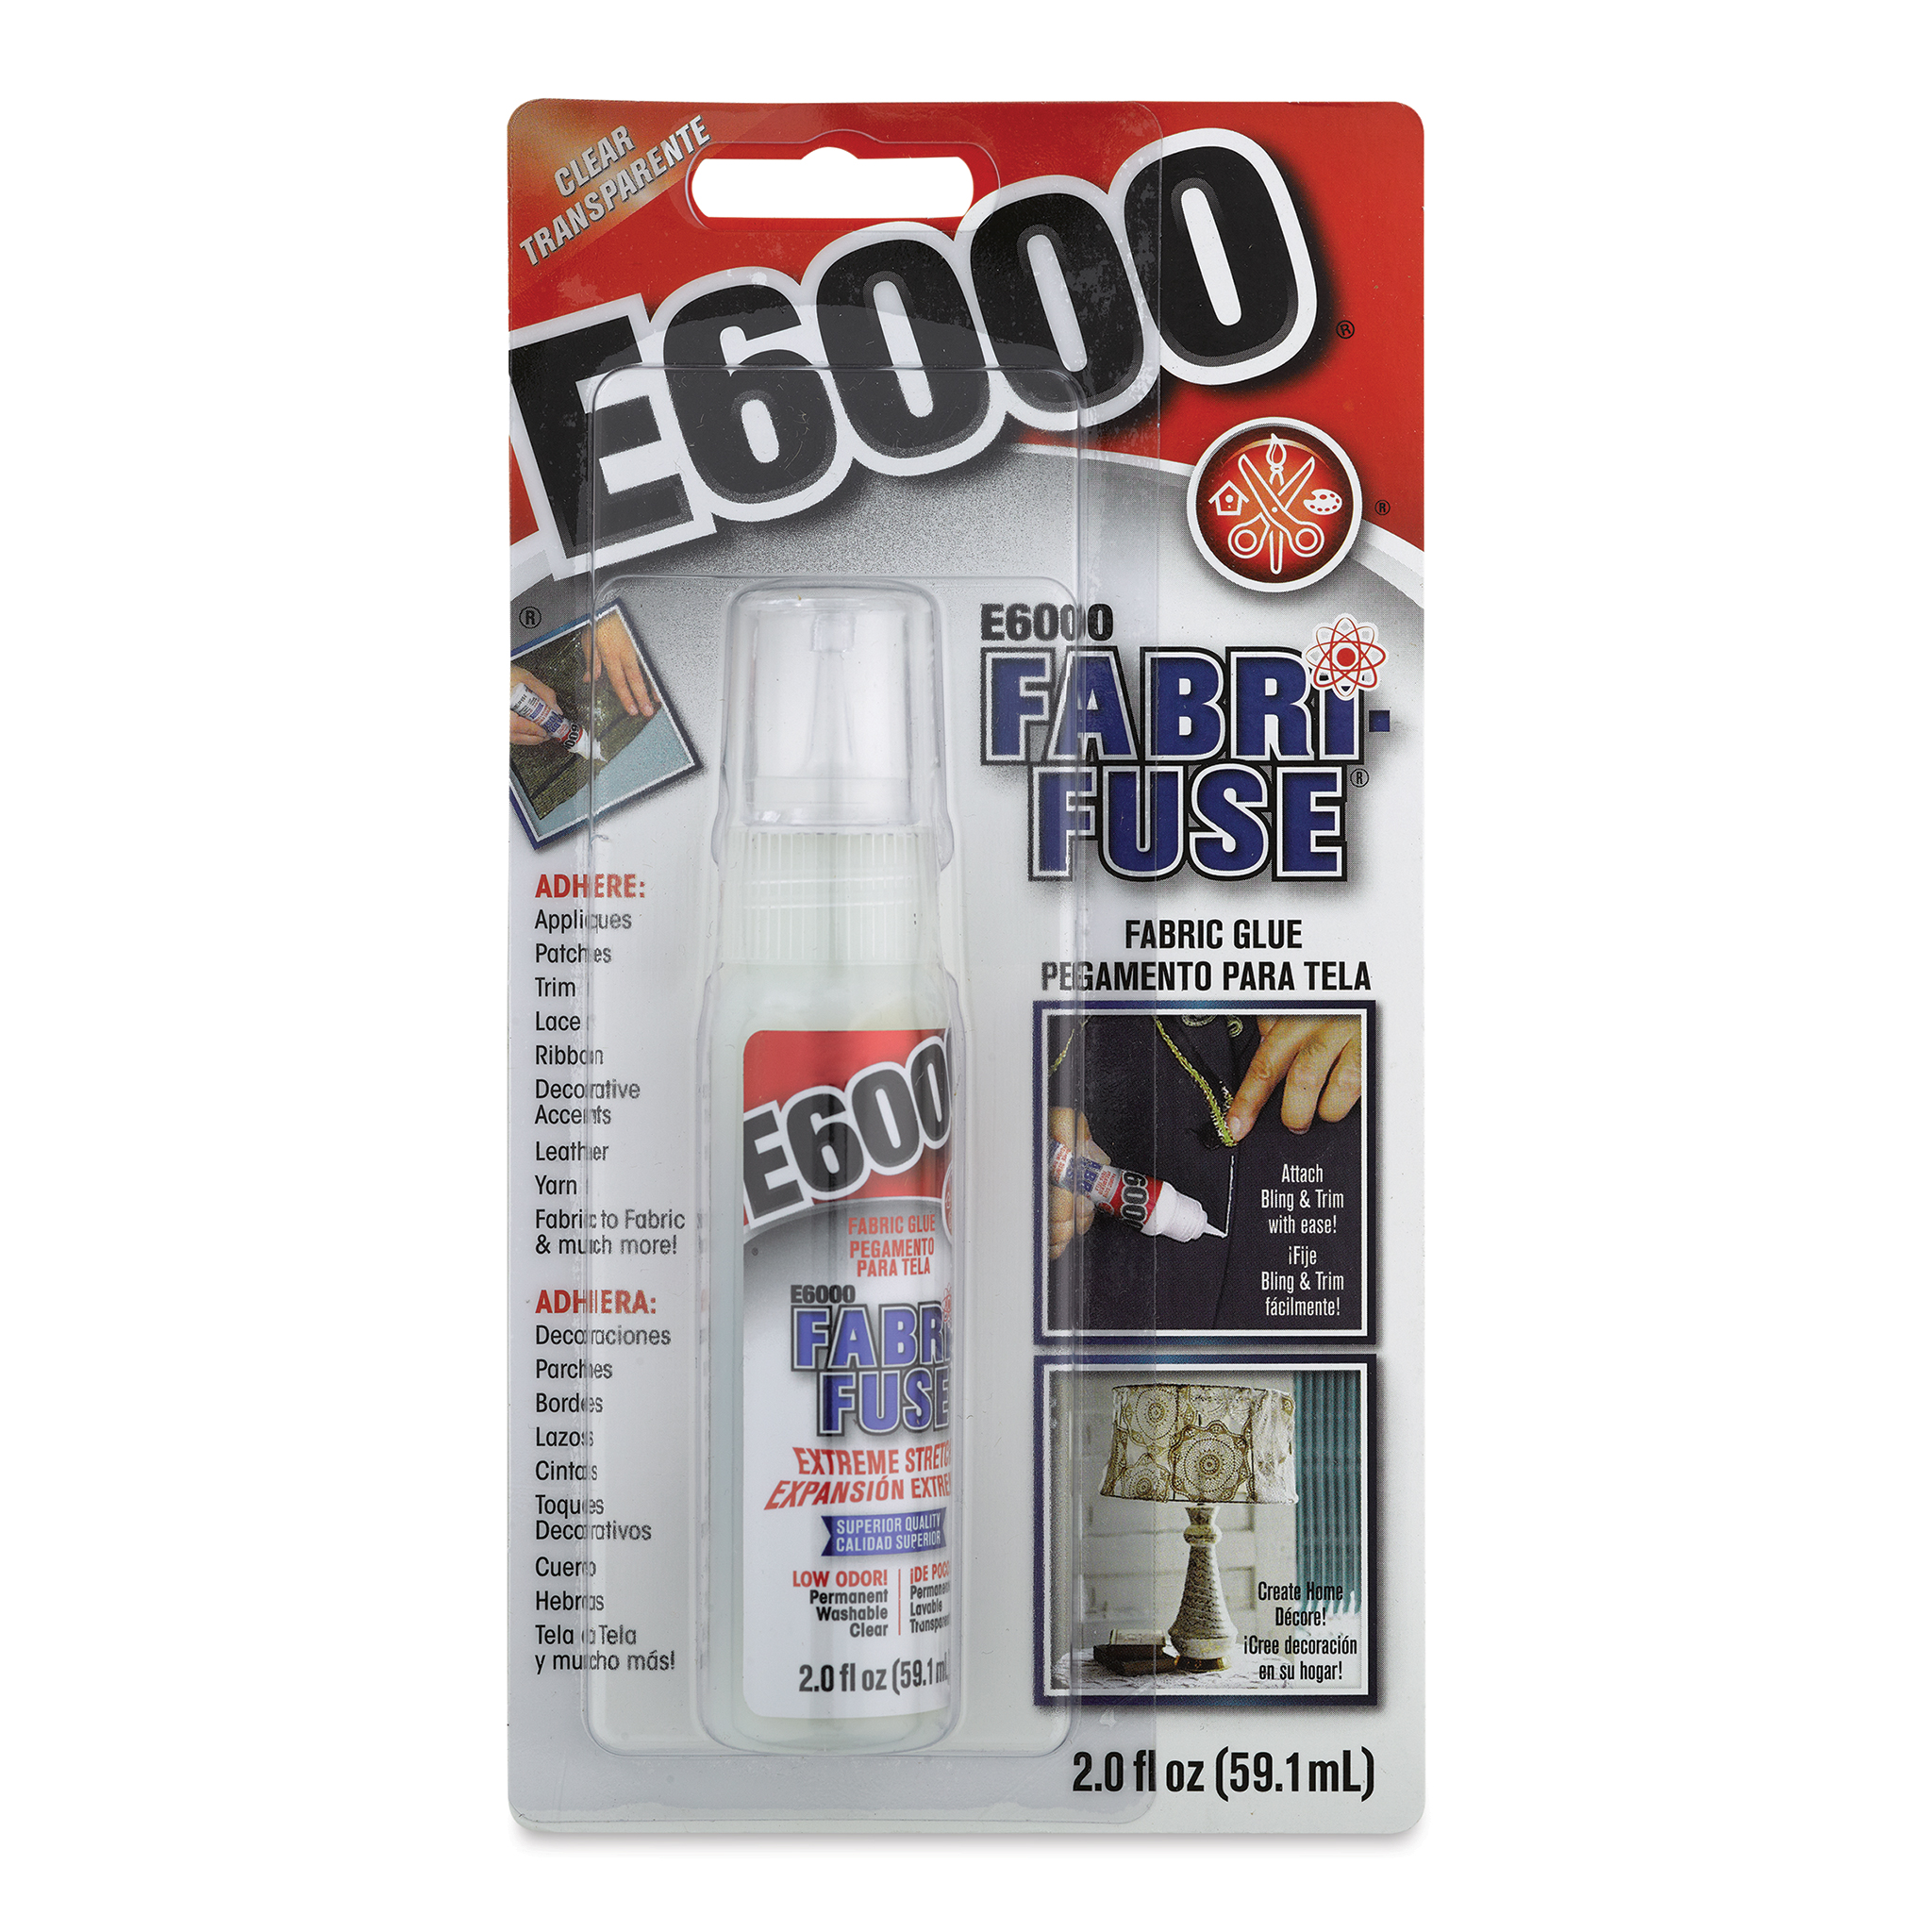 How To Use E6000 Fabri-Fuse For Great Results - Making Make Believe